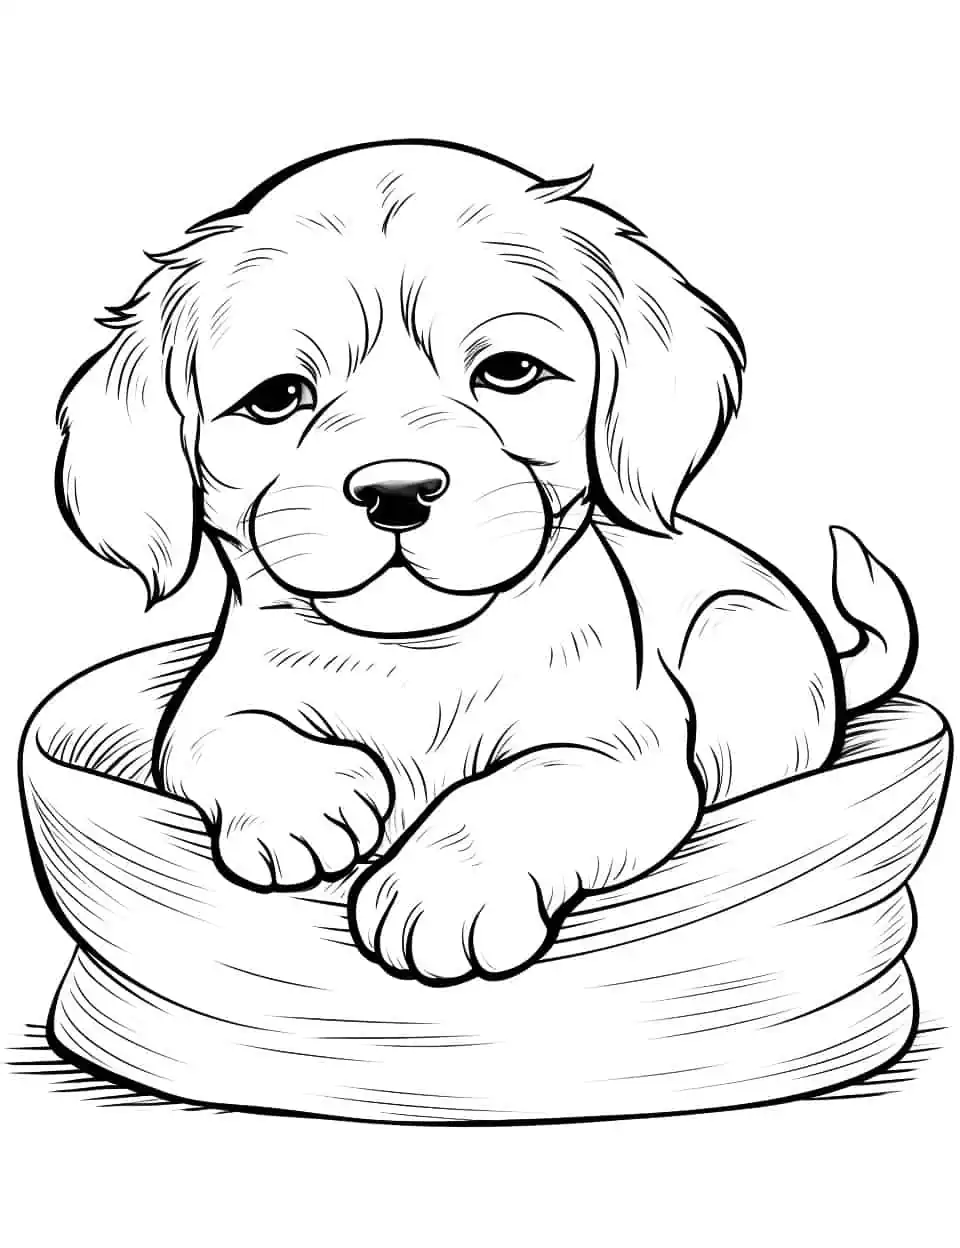 Baby Dog's Nap Time Coloring Page - A baby dog sleeping soundly in its cozy bed.